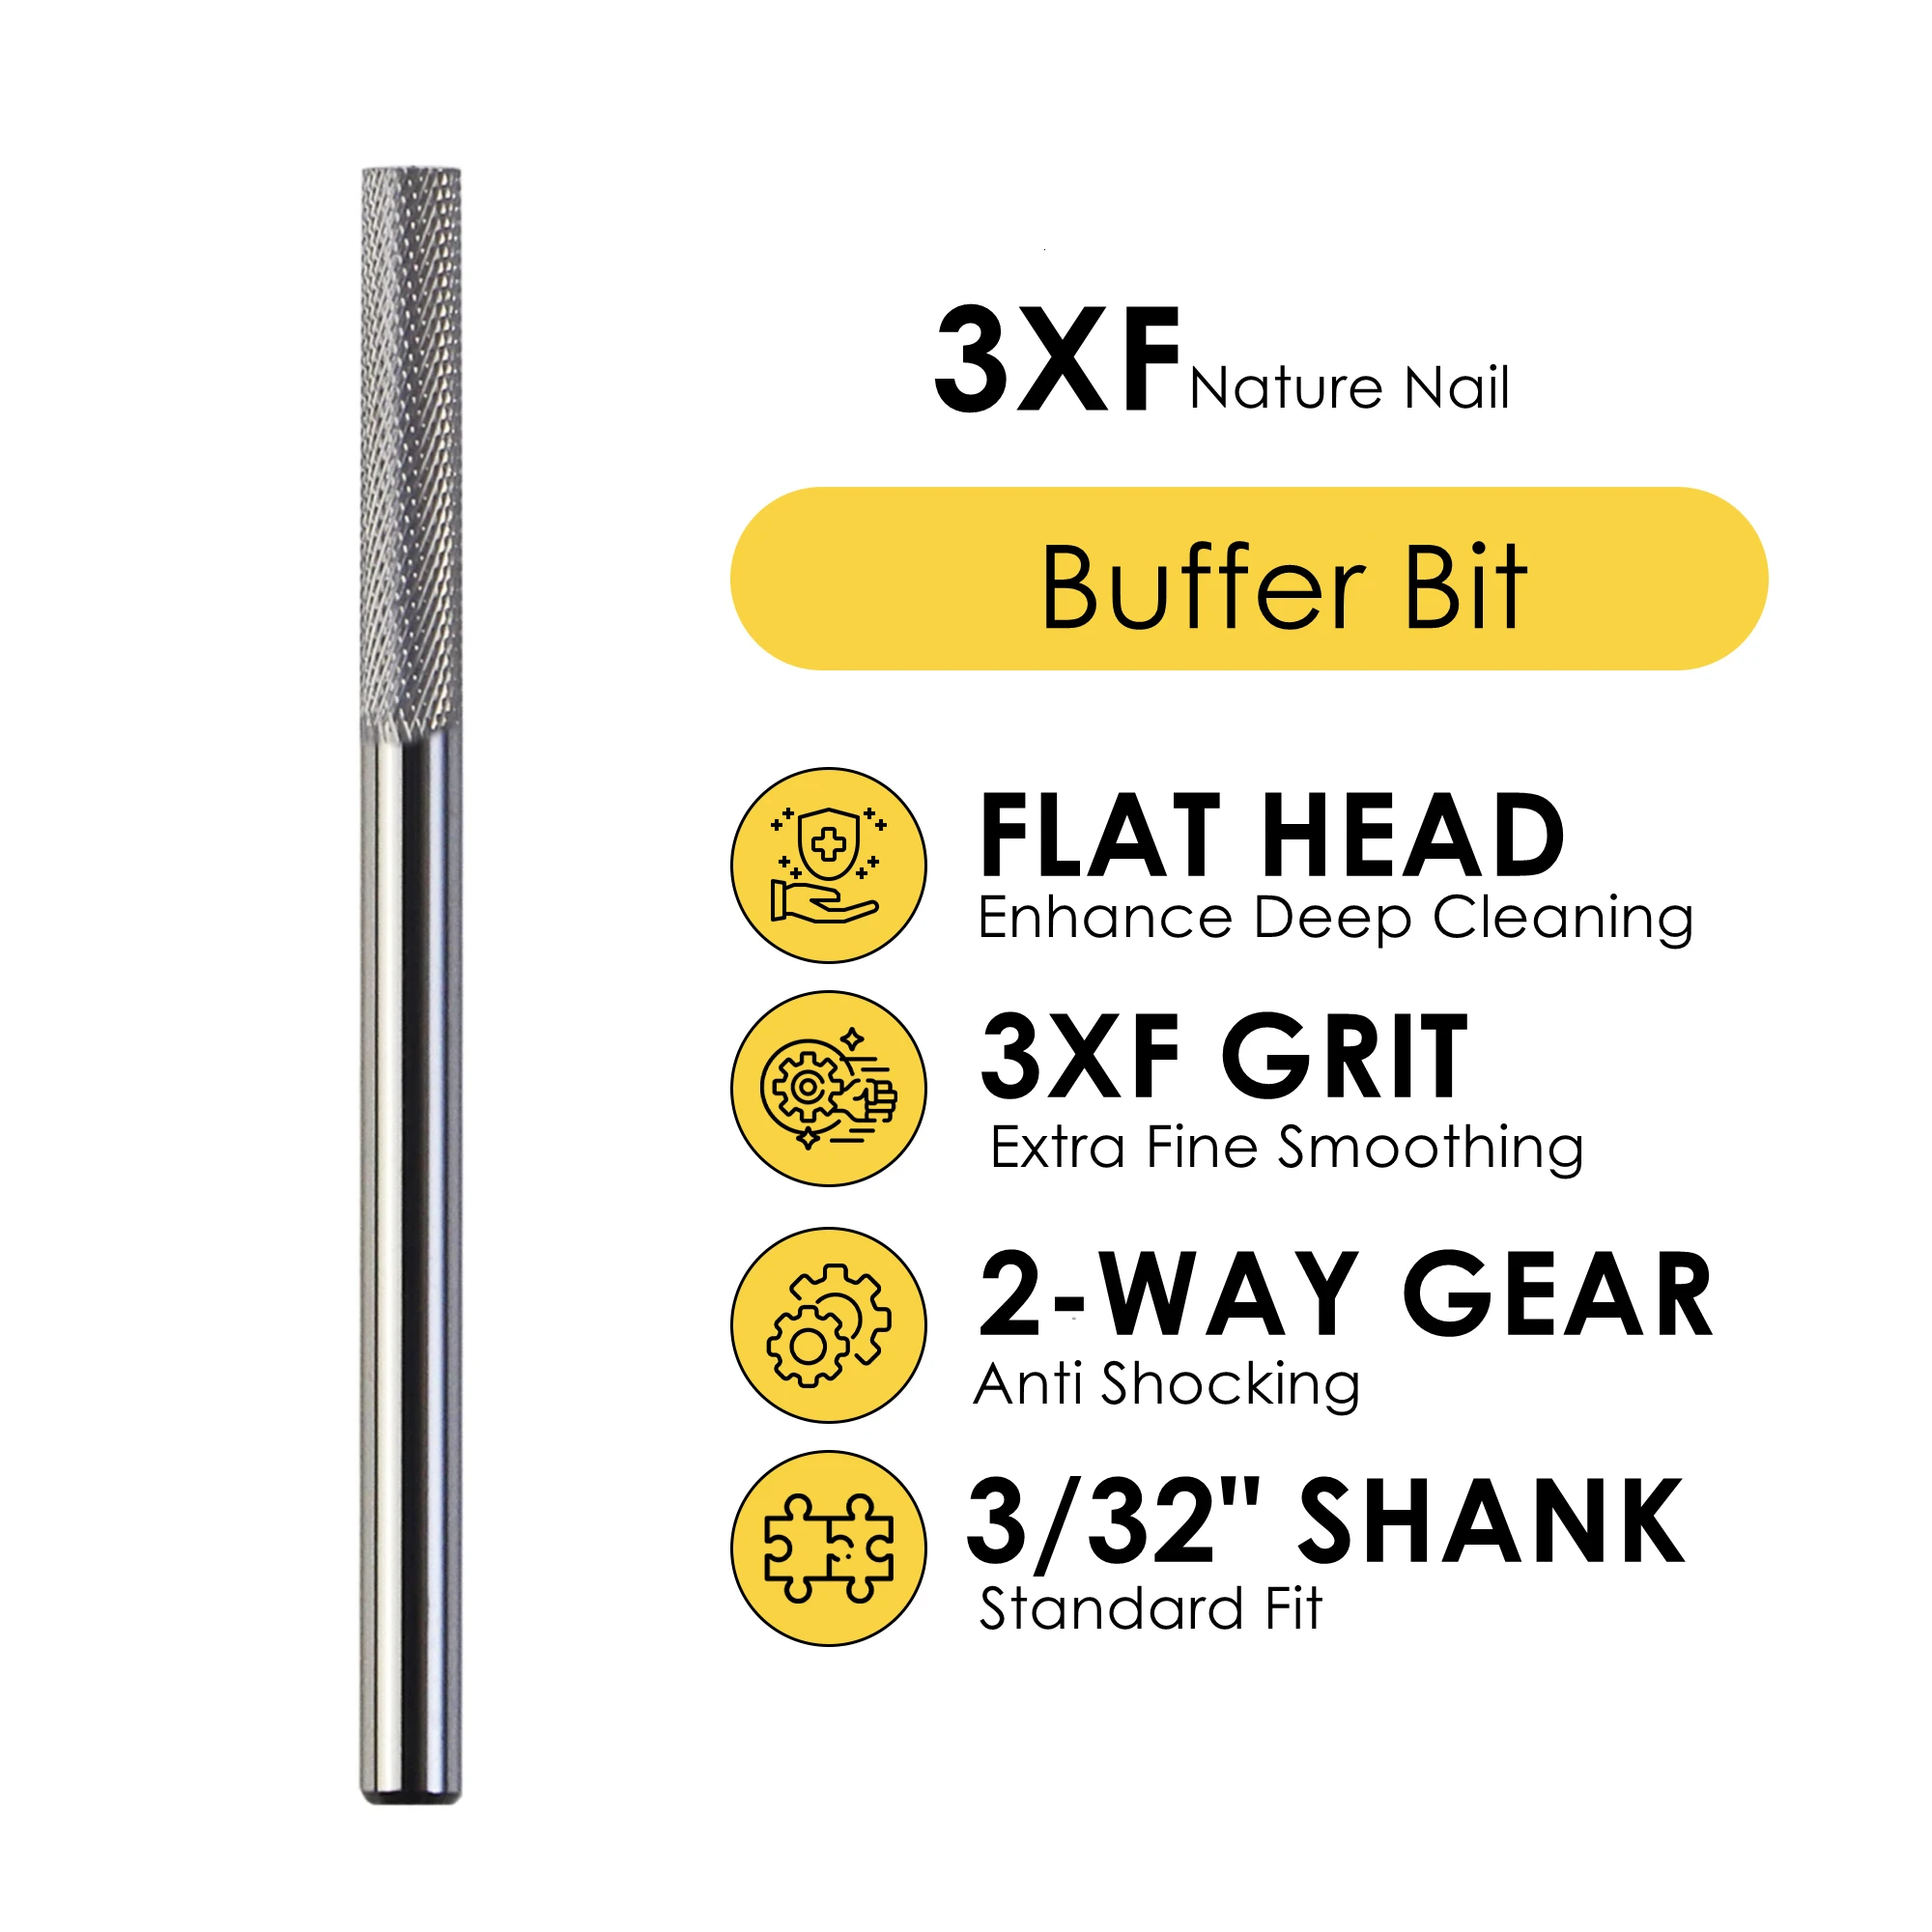 Premium Nature Nail Buffer Bit Tungsten Nail Drill Smooth 3XF Grit 3/32 Safety Carbide Nail Cutter for Nature Nail Bed Nail File